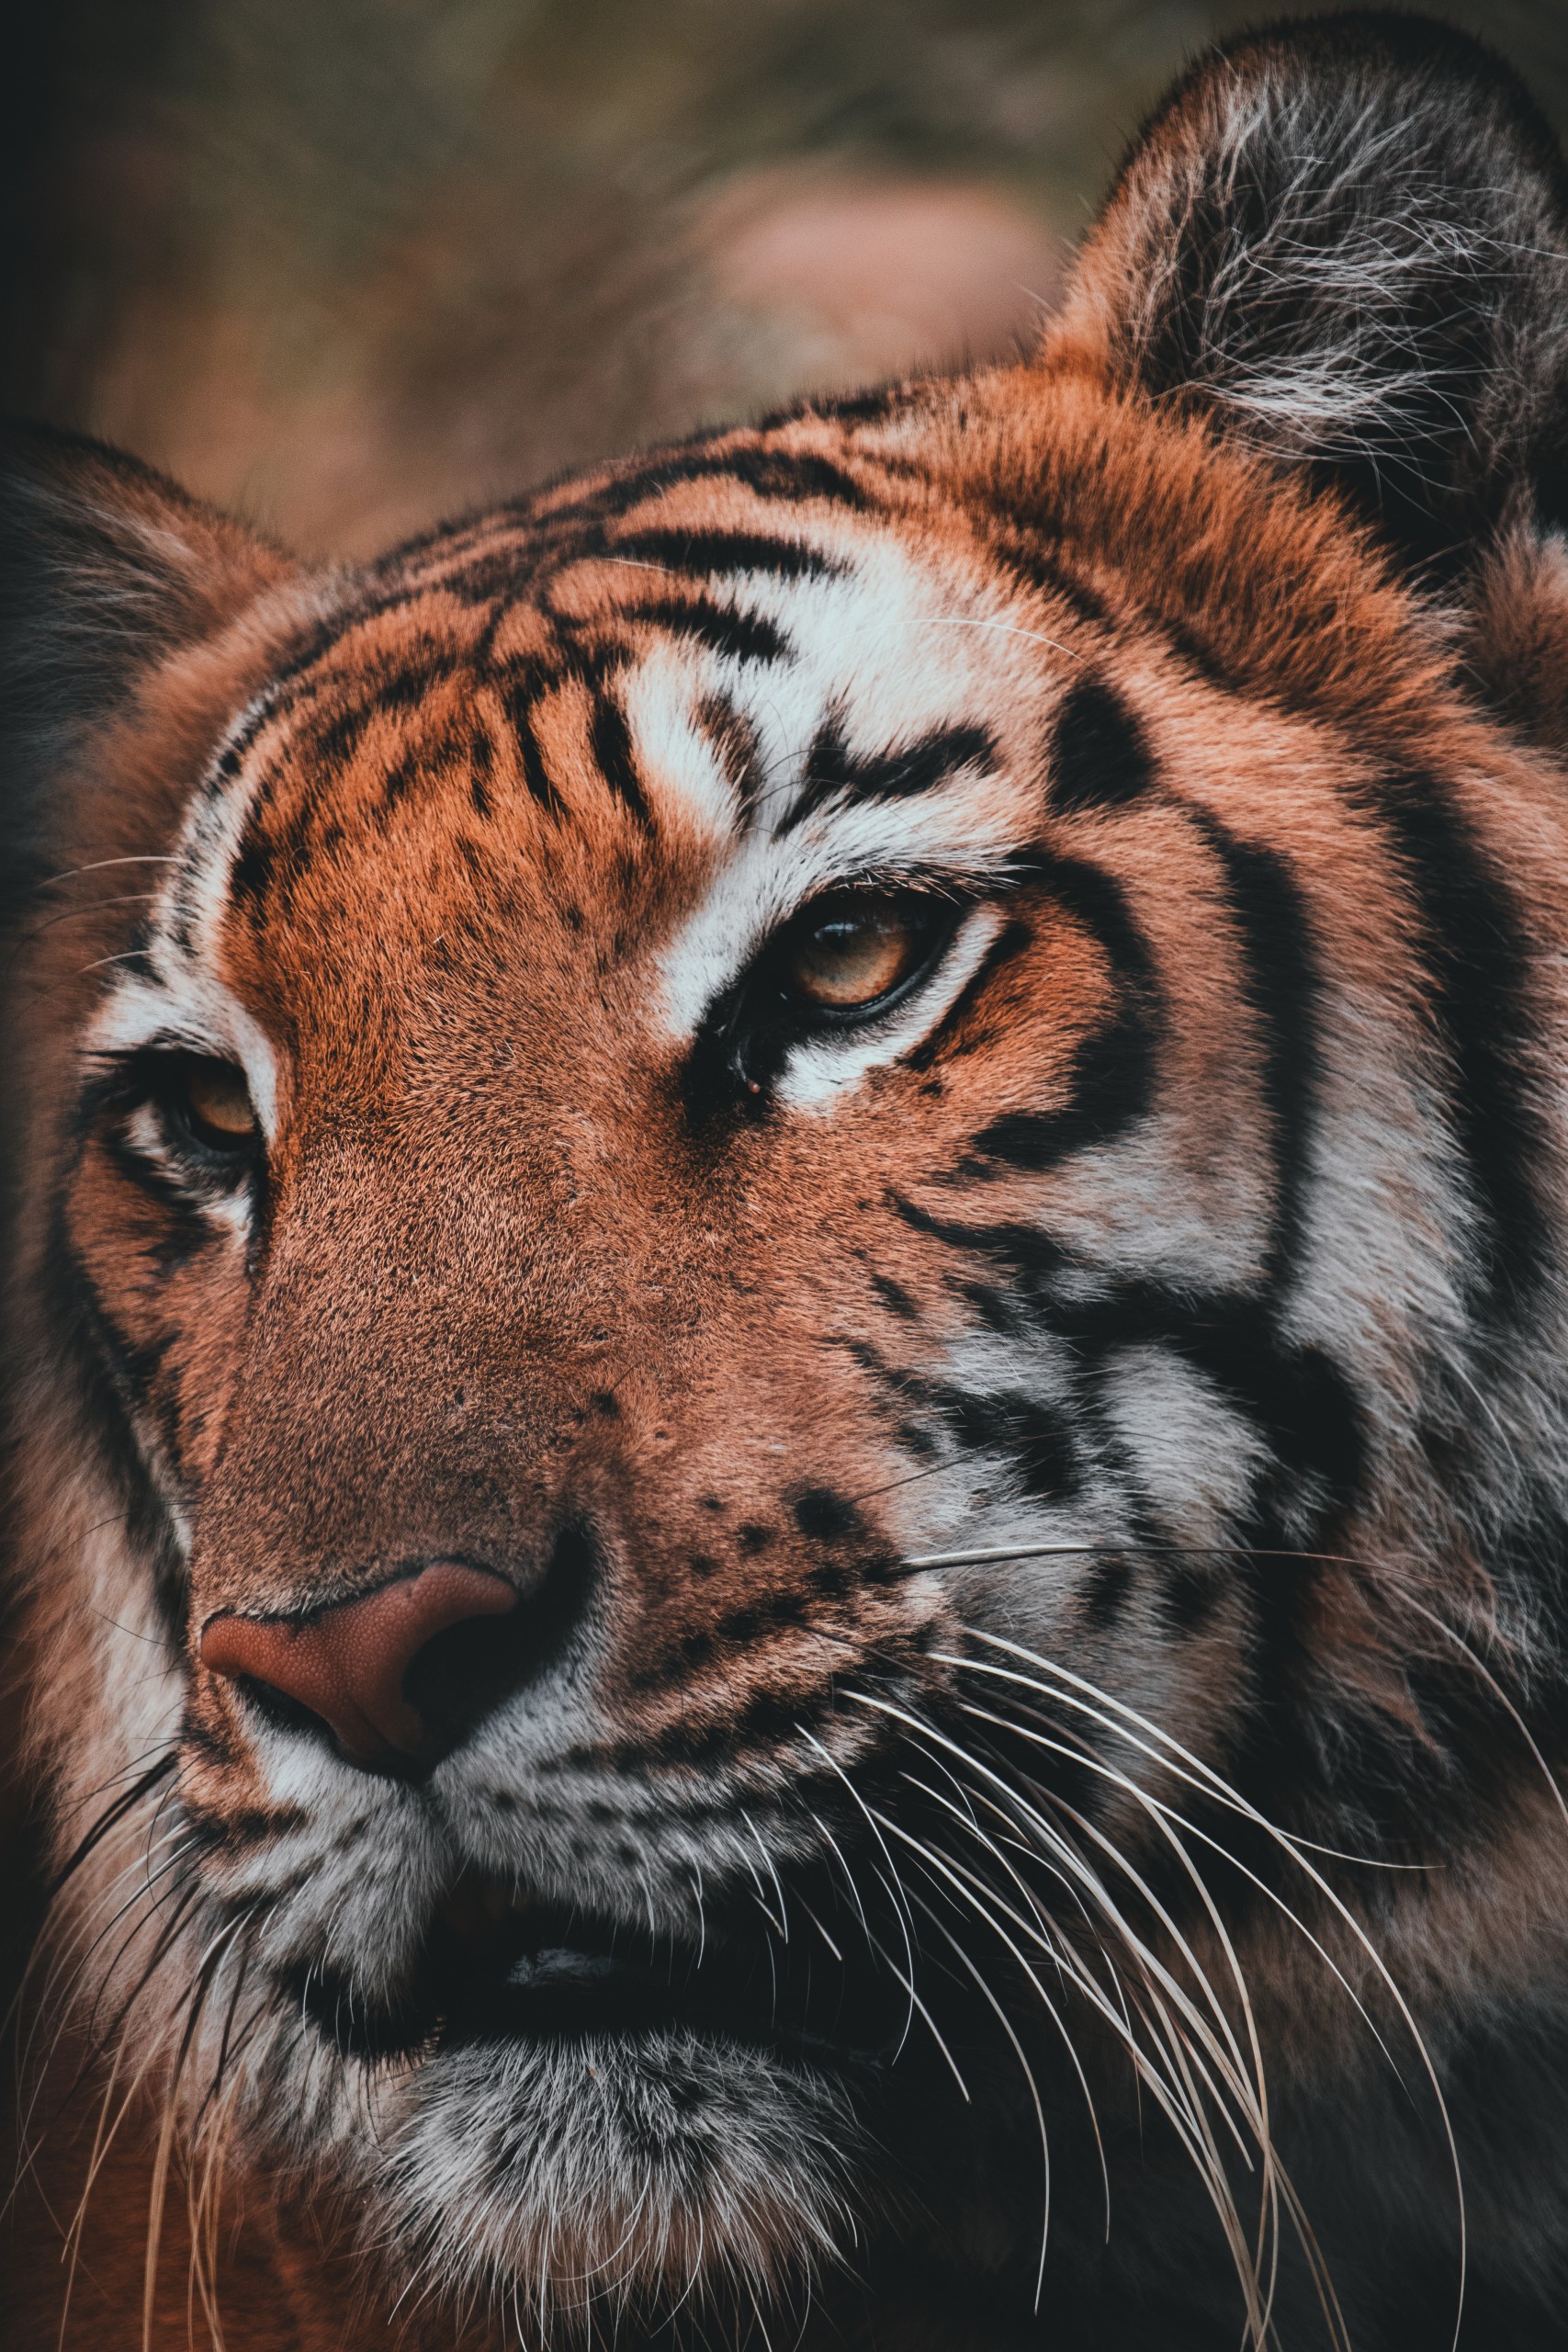 Face of a Tiger